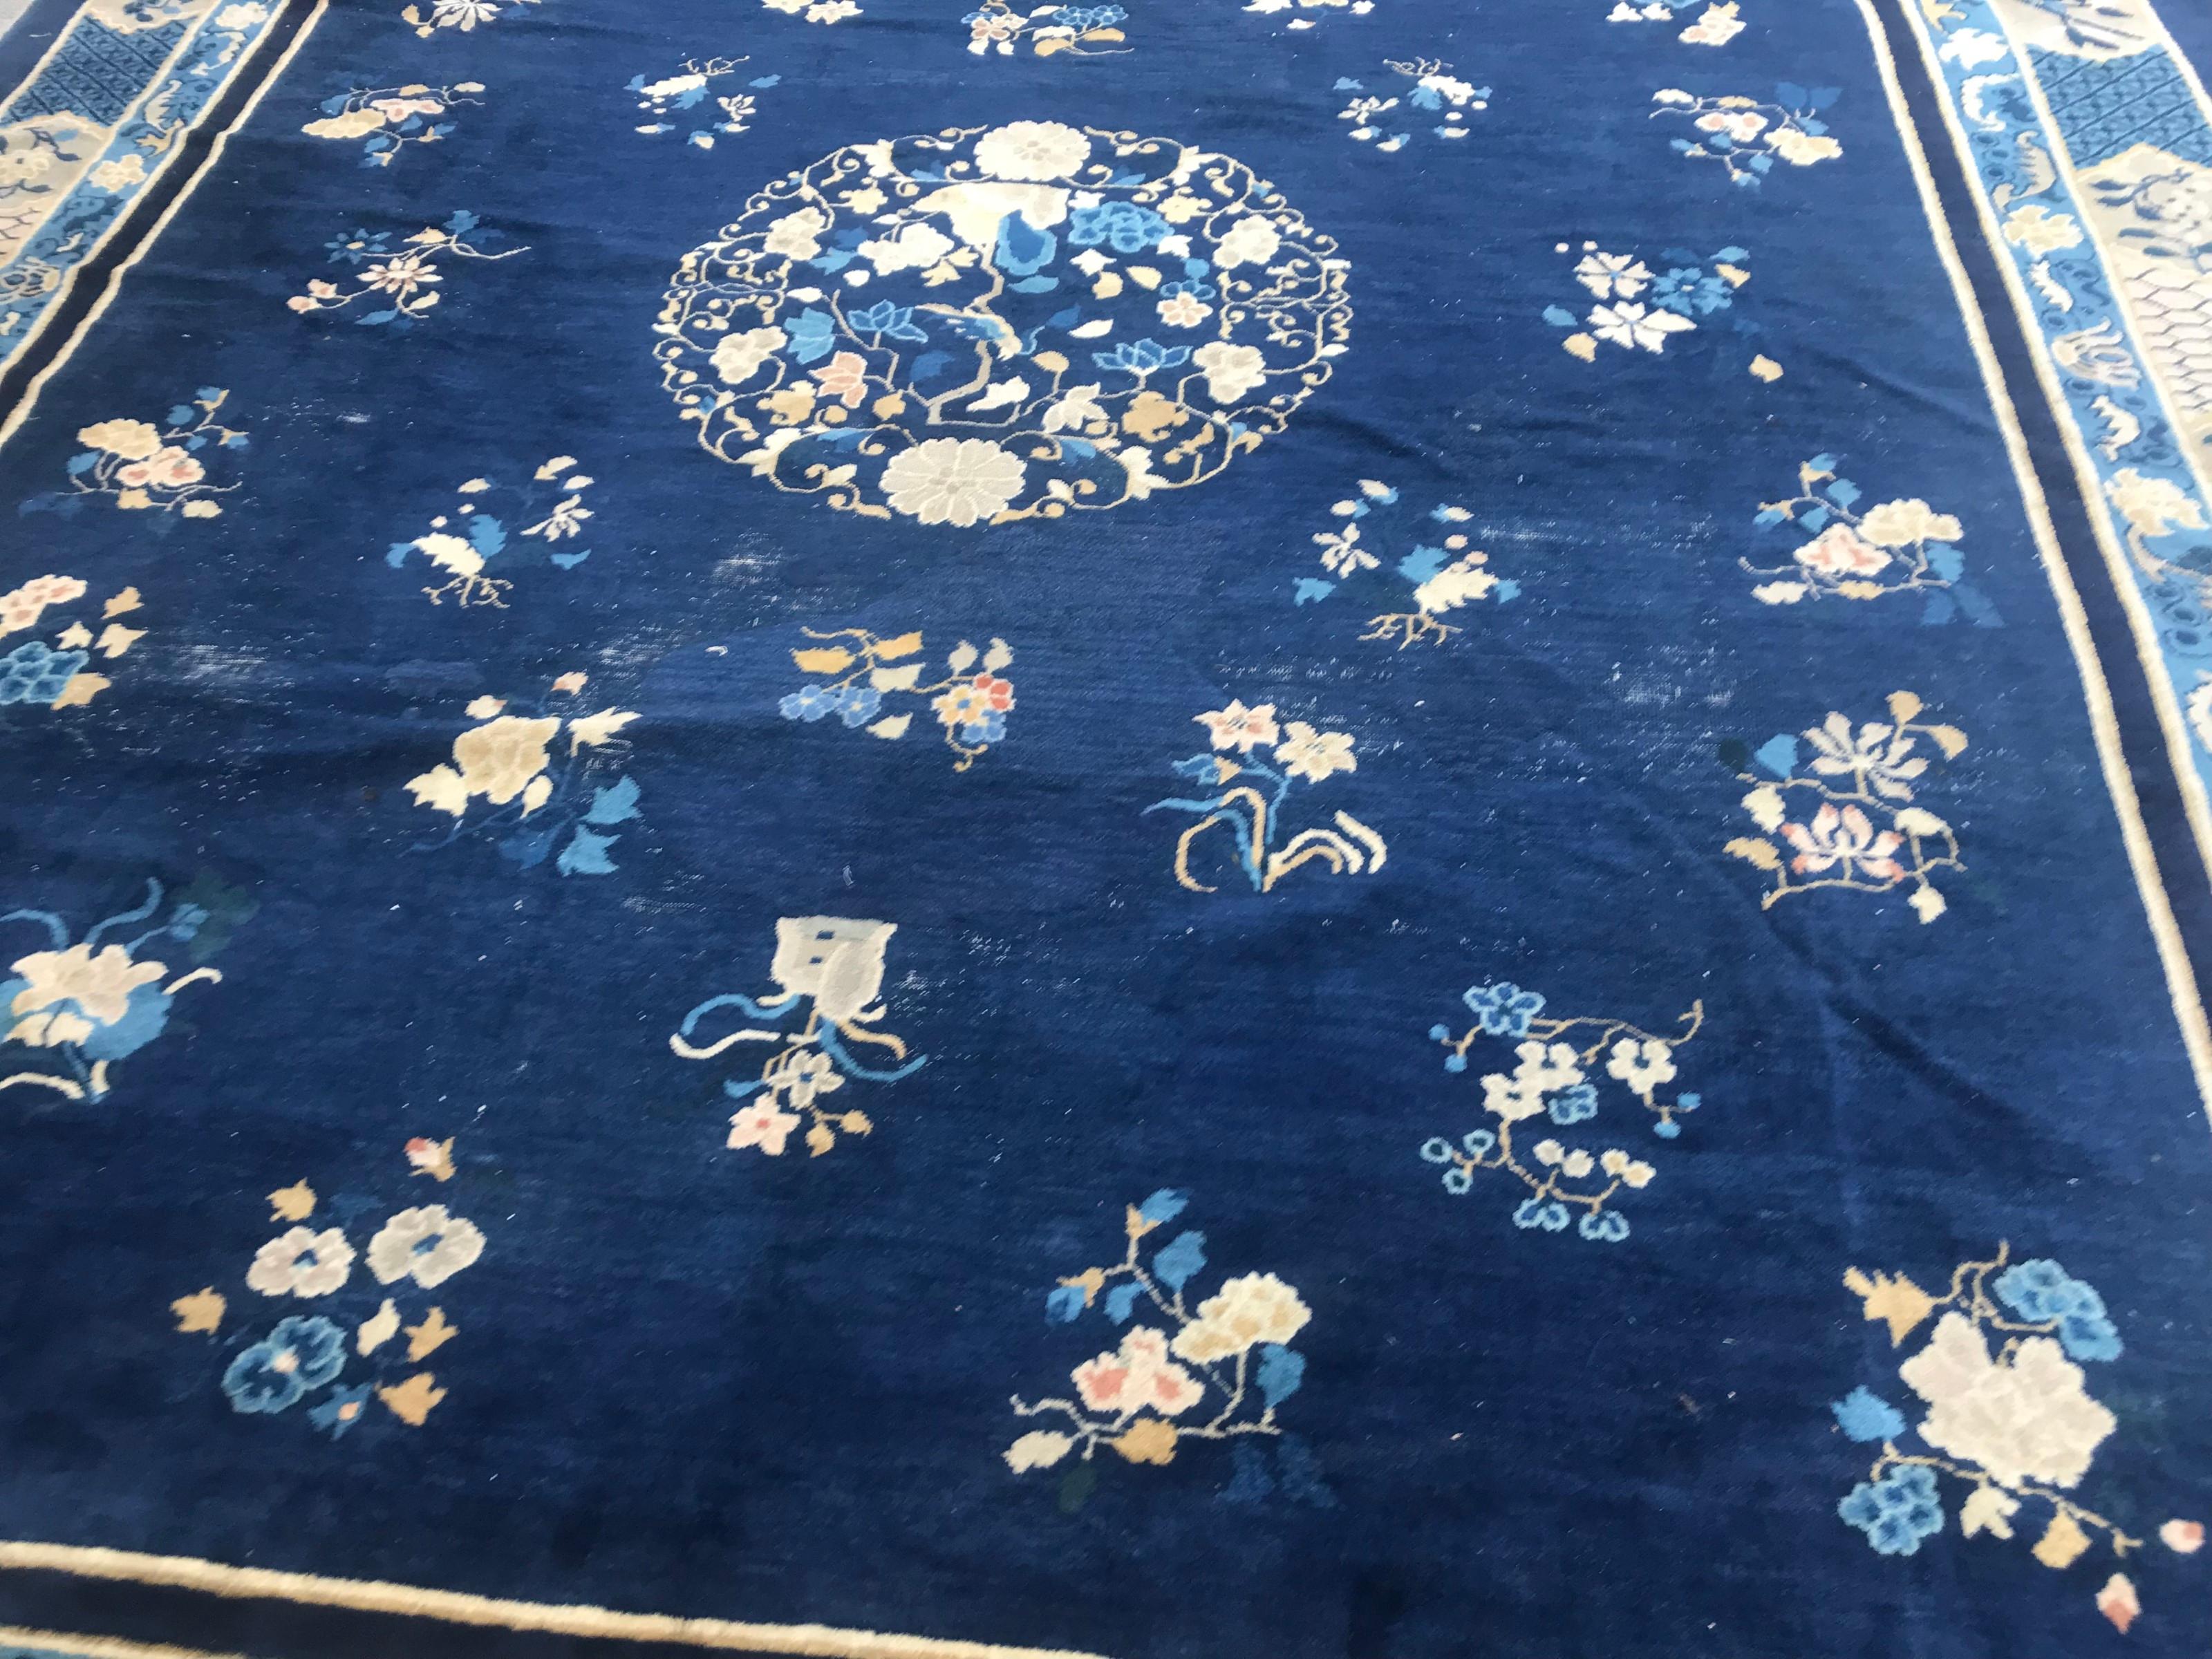 Very beautiful large antique Chinese rug with a beautiful Chinese design and a blue field color, entirely hand knotted with wool velvet on cotton foundation.